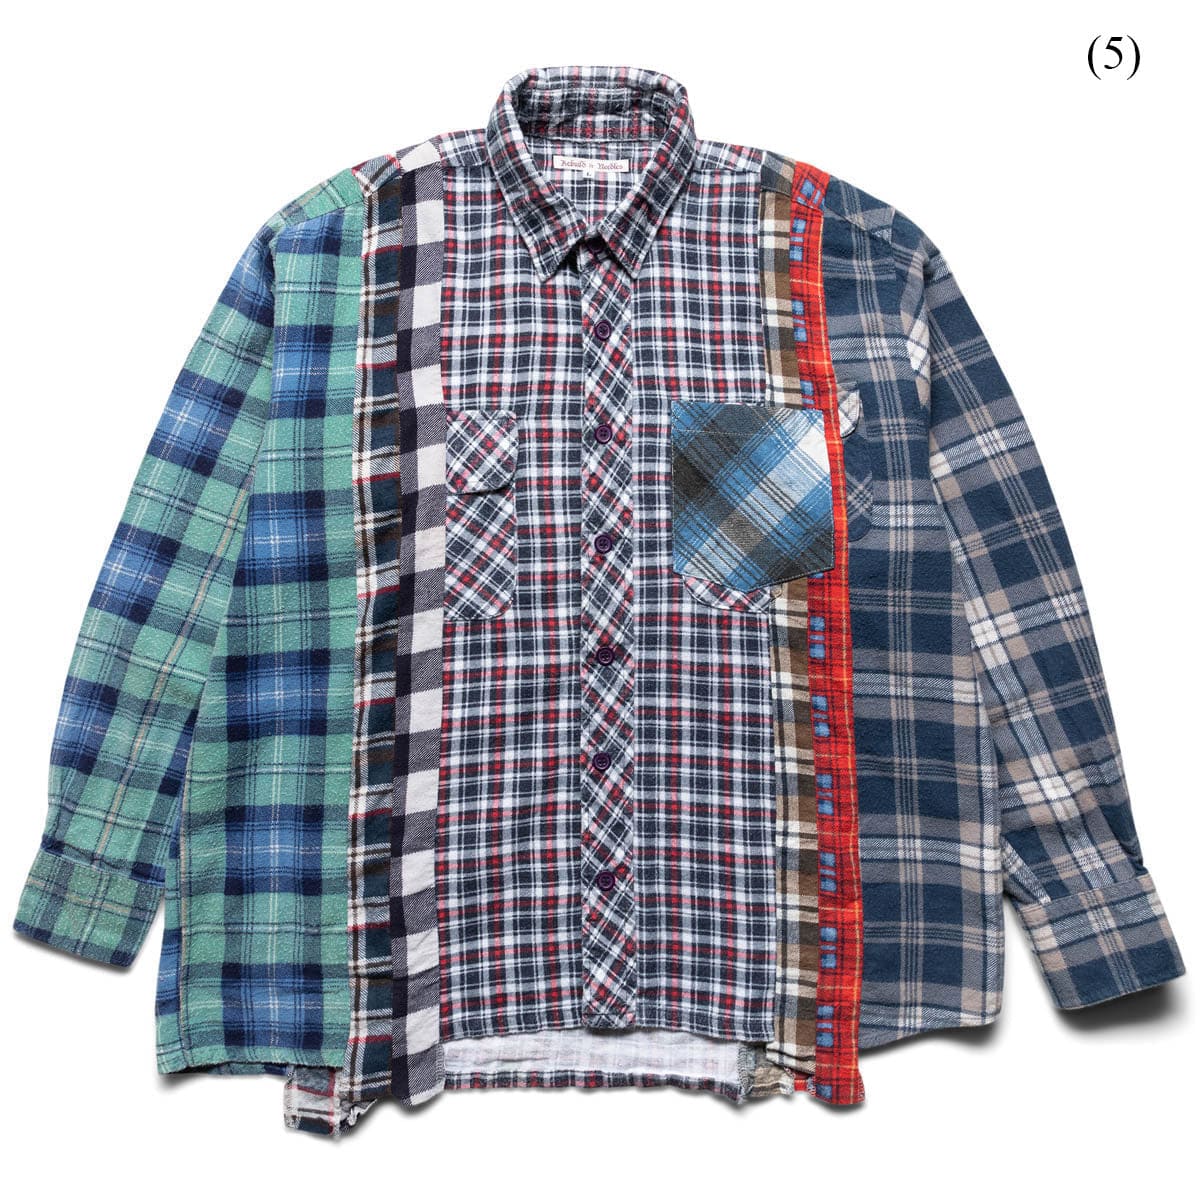 Needles FLANNEL SHIRT - 7 CUTS SHIRT SS22 (LARGE/MULTIPLE STYLES)